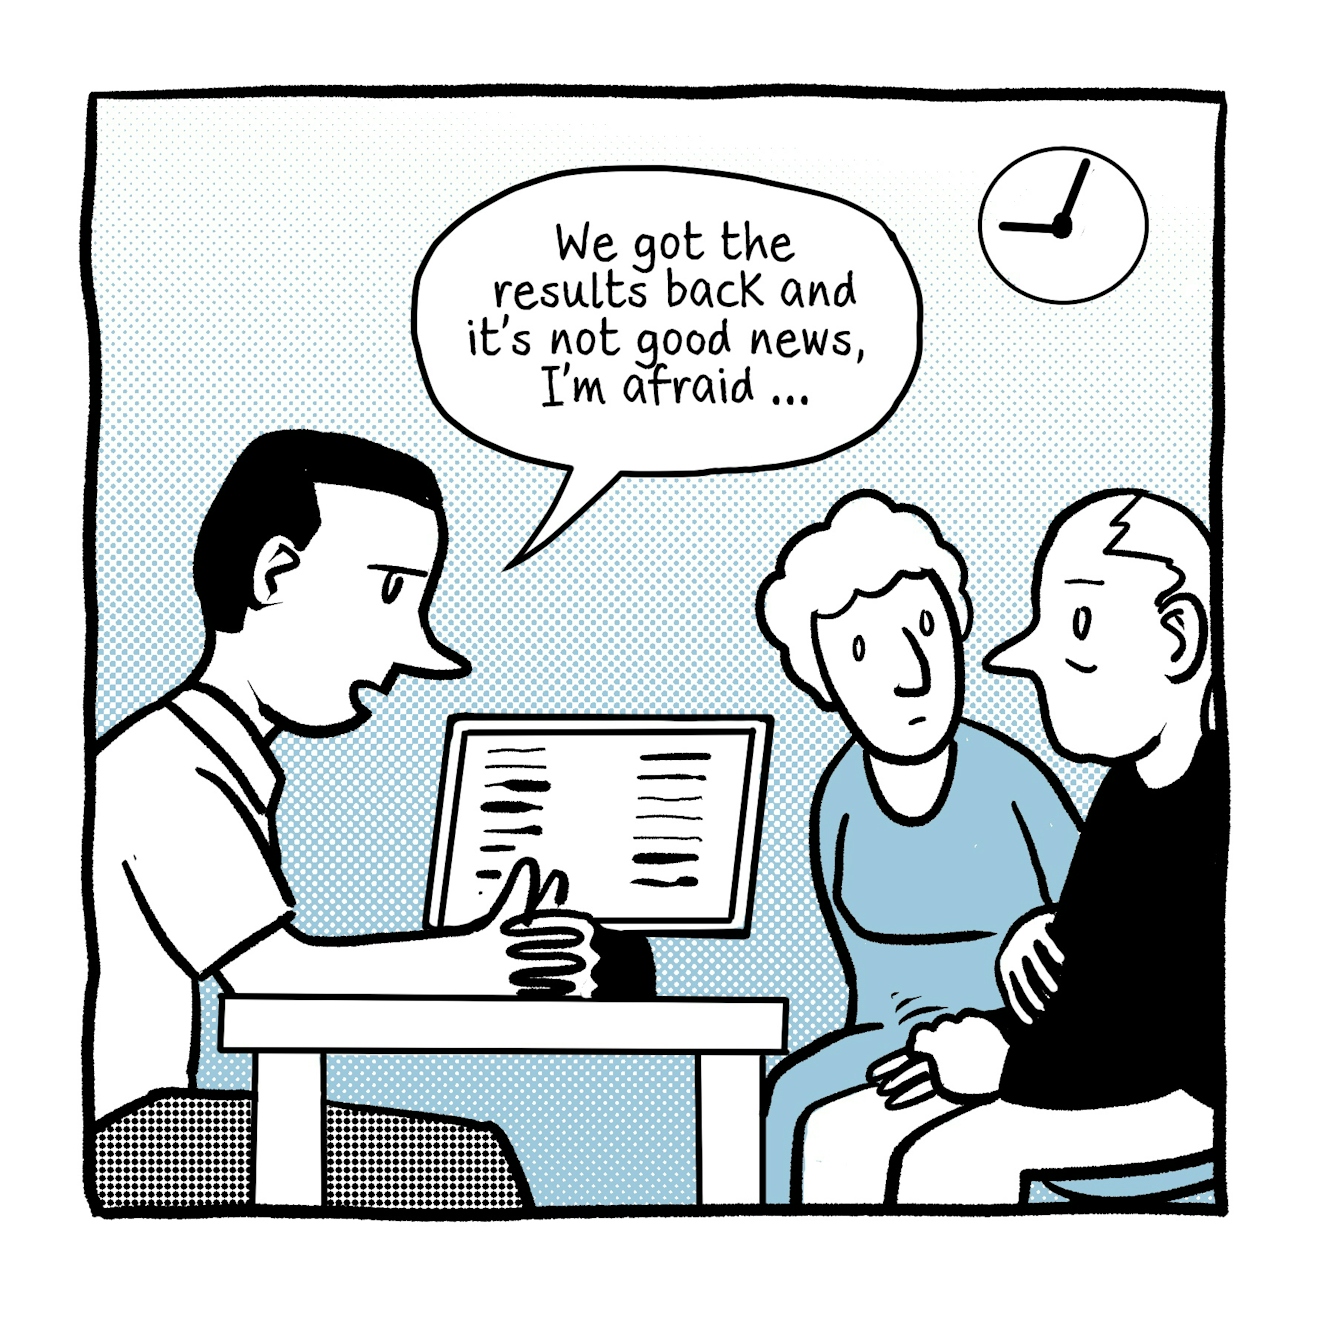 A four panel comic in black and white with a bright blue accent tone. 

The first panel shows a young male GP sitting at his consulting desk next to his computer screen. Across the desk is an anxious looking couple who are holding hands. The GP is saying "We got the results back and it's not good new, I'm afraid..." The clock on the wall behind shows 9:05am.